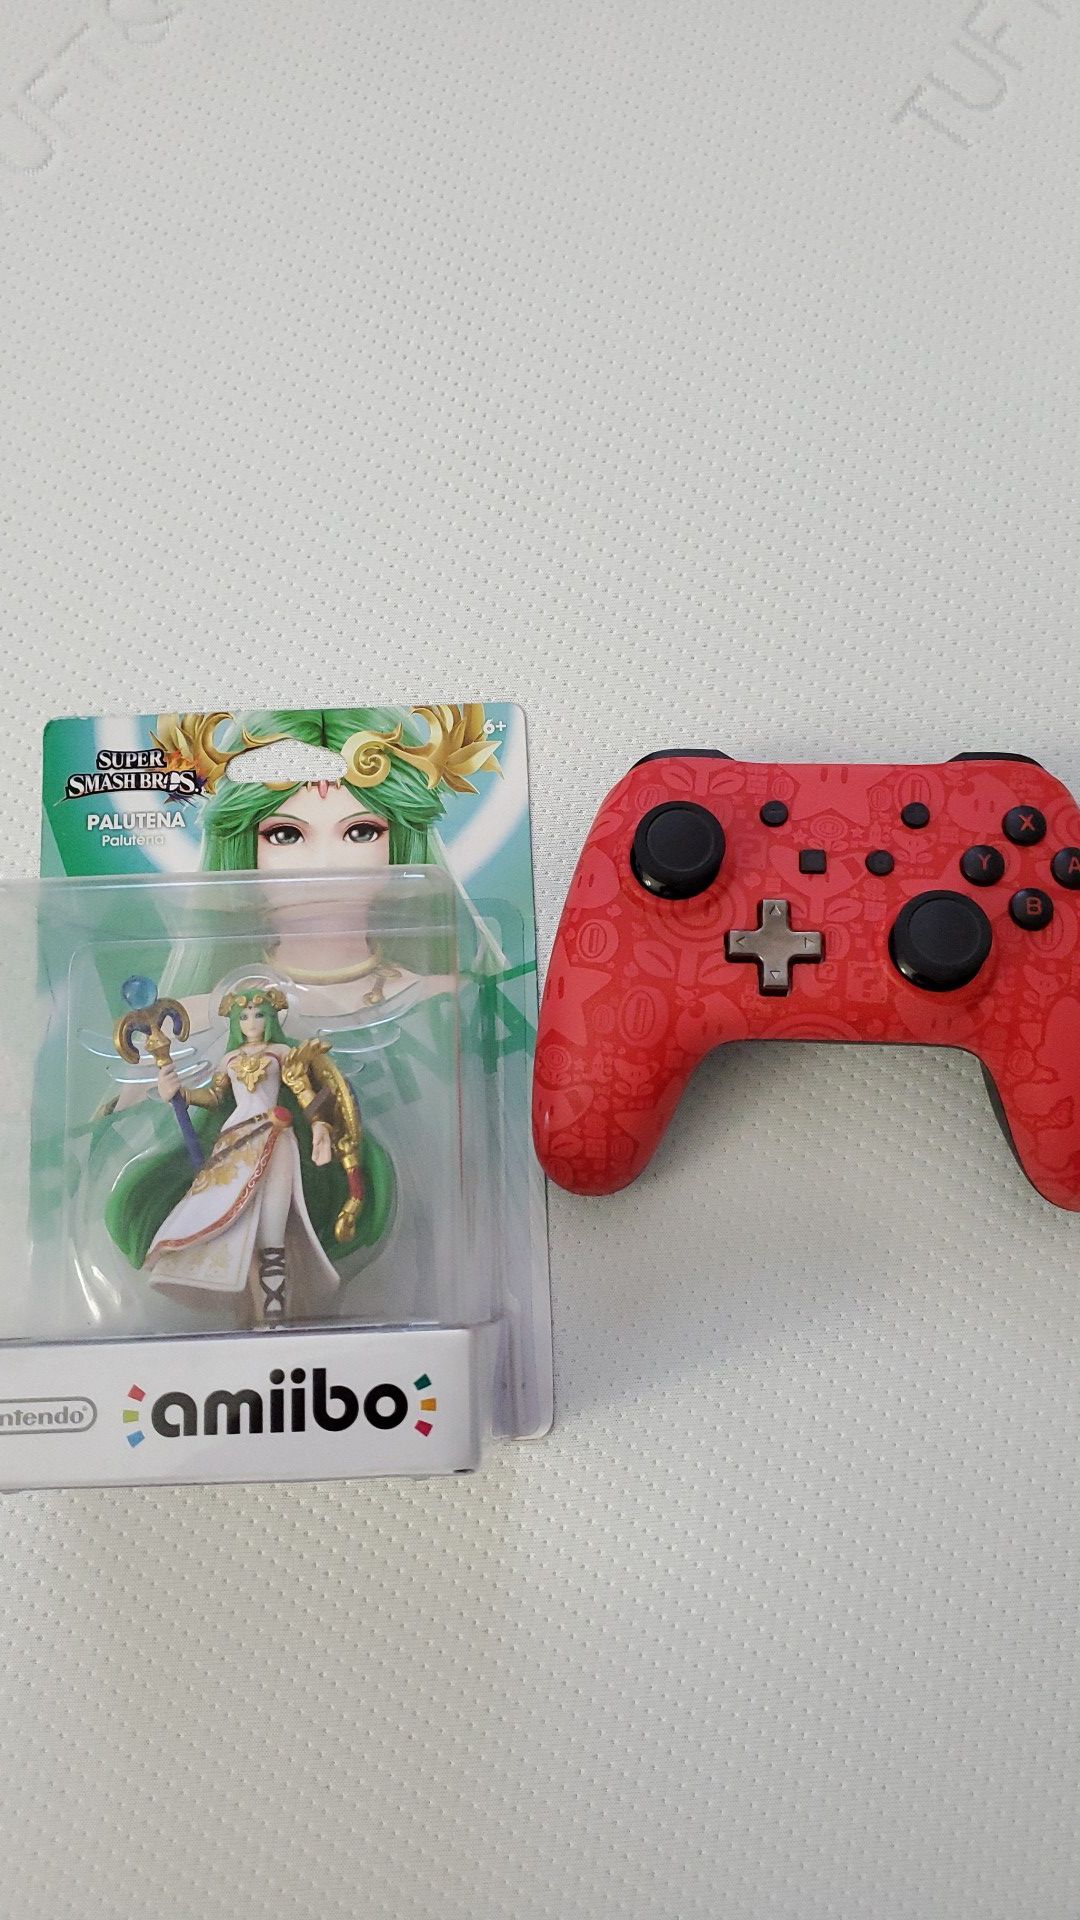 Palutena Amiibo and Super Mario Brothers Wired Controller (missing wire) for Nintendo Switch / Super Smash Bros